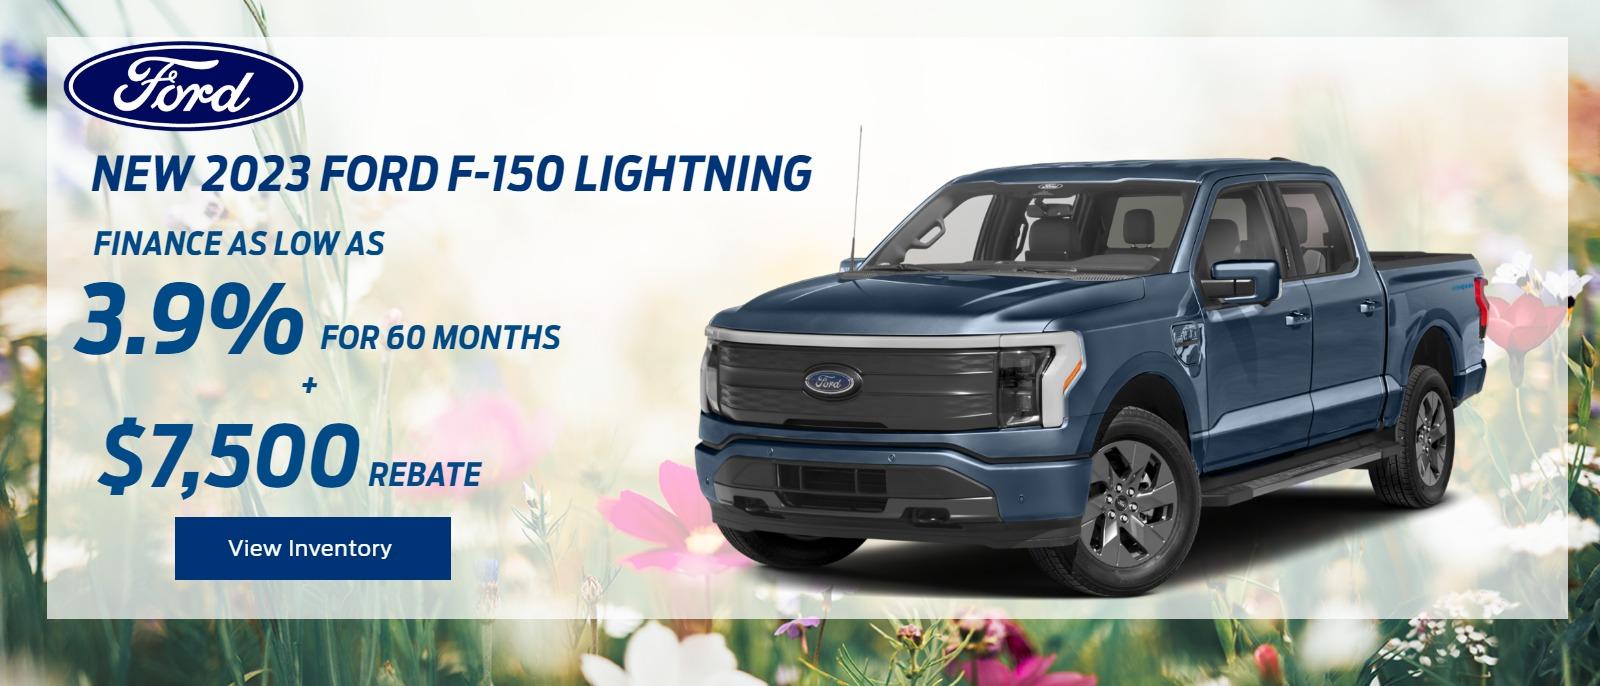 New 2023 Ford F-150 LIGHTNING
 Finance as low as 3.9% FOR 60 MONTHS